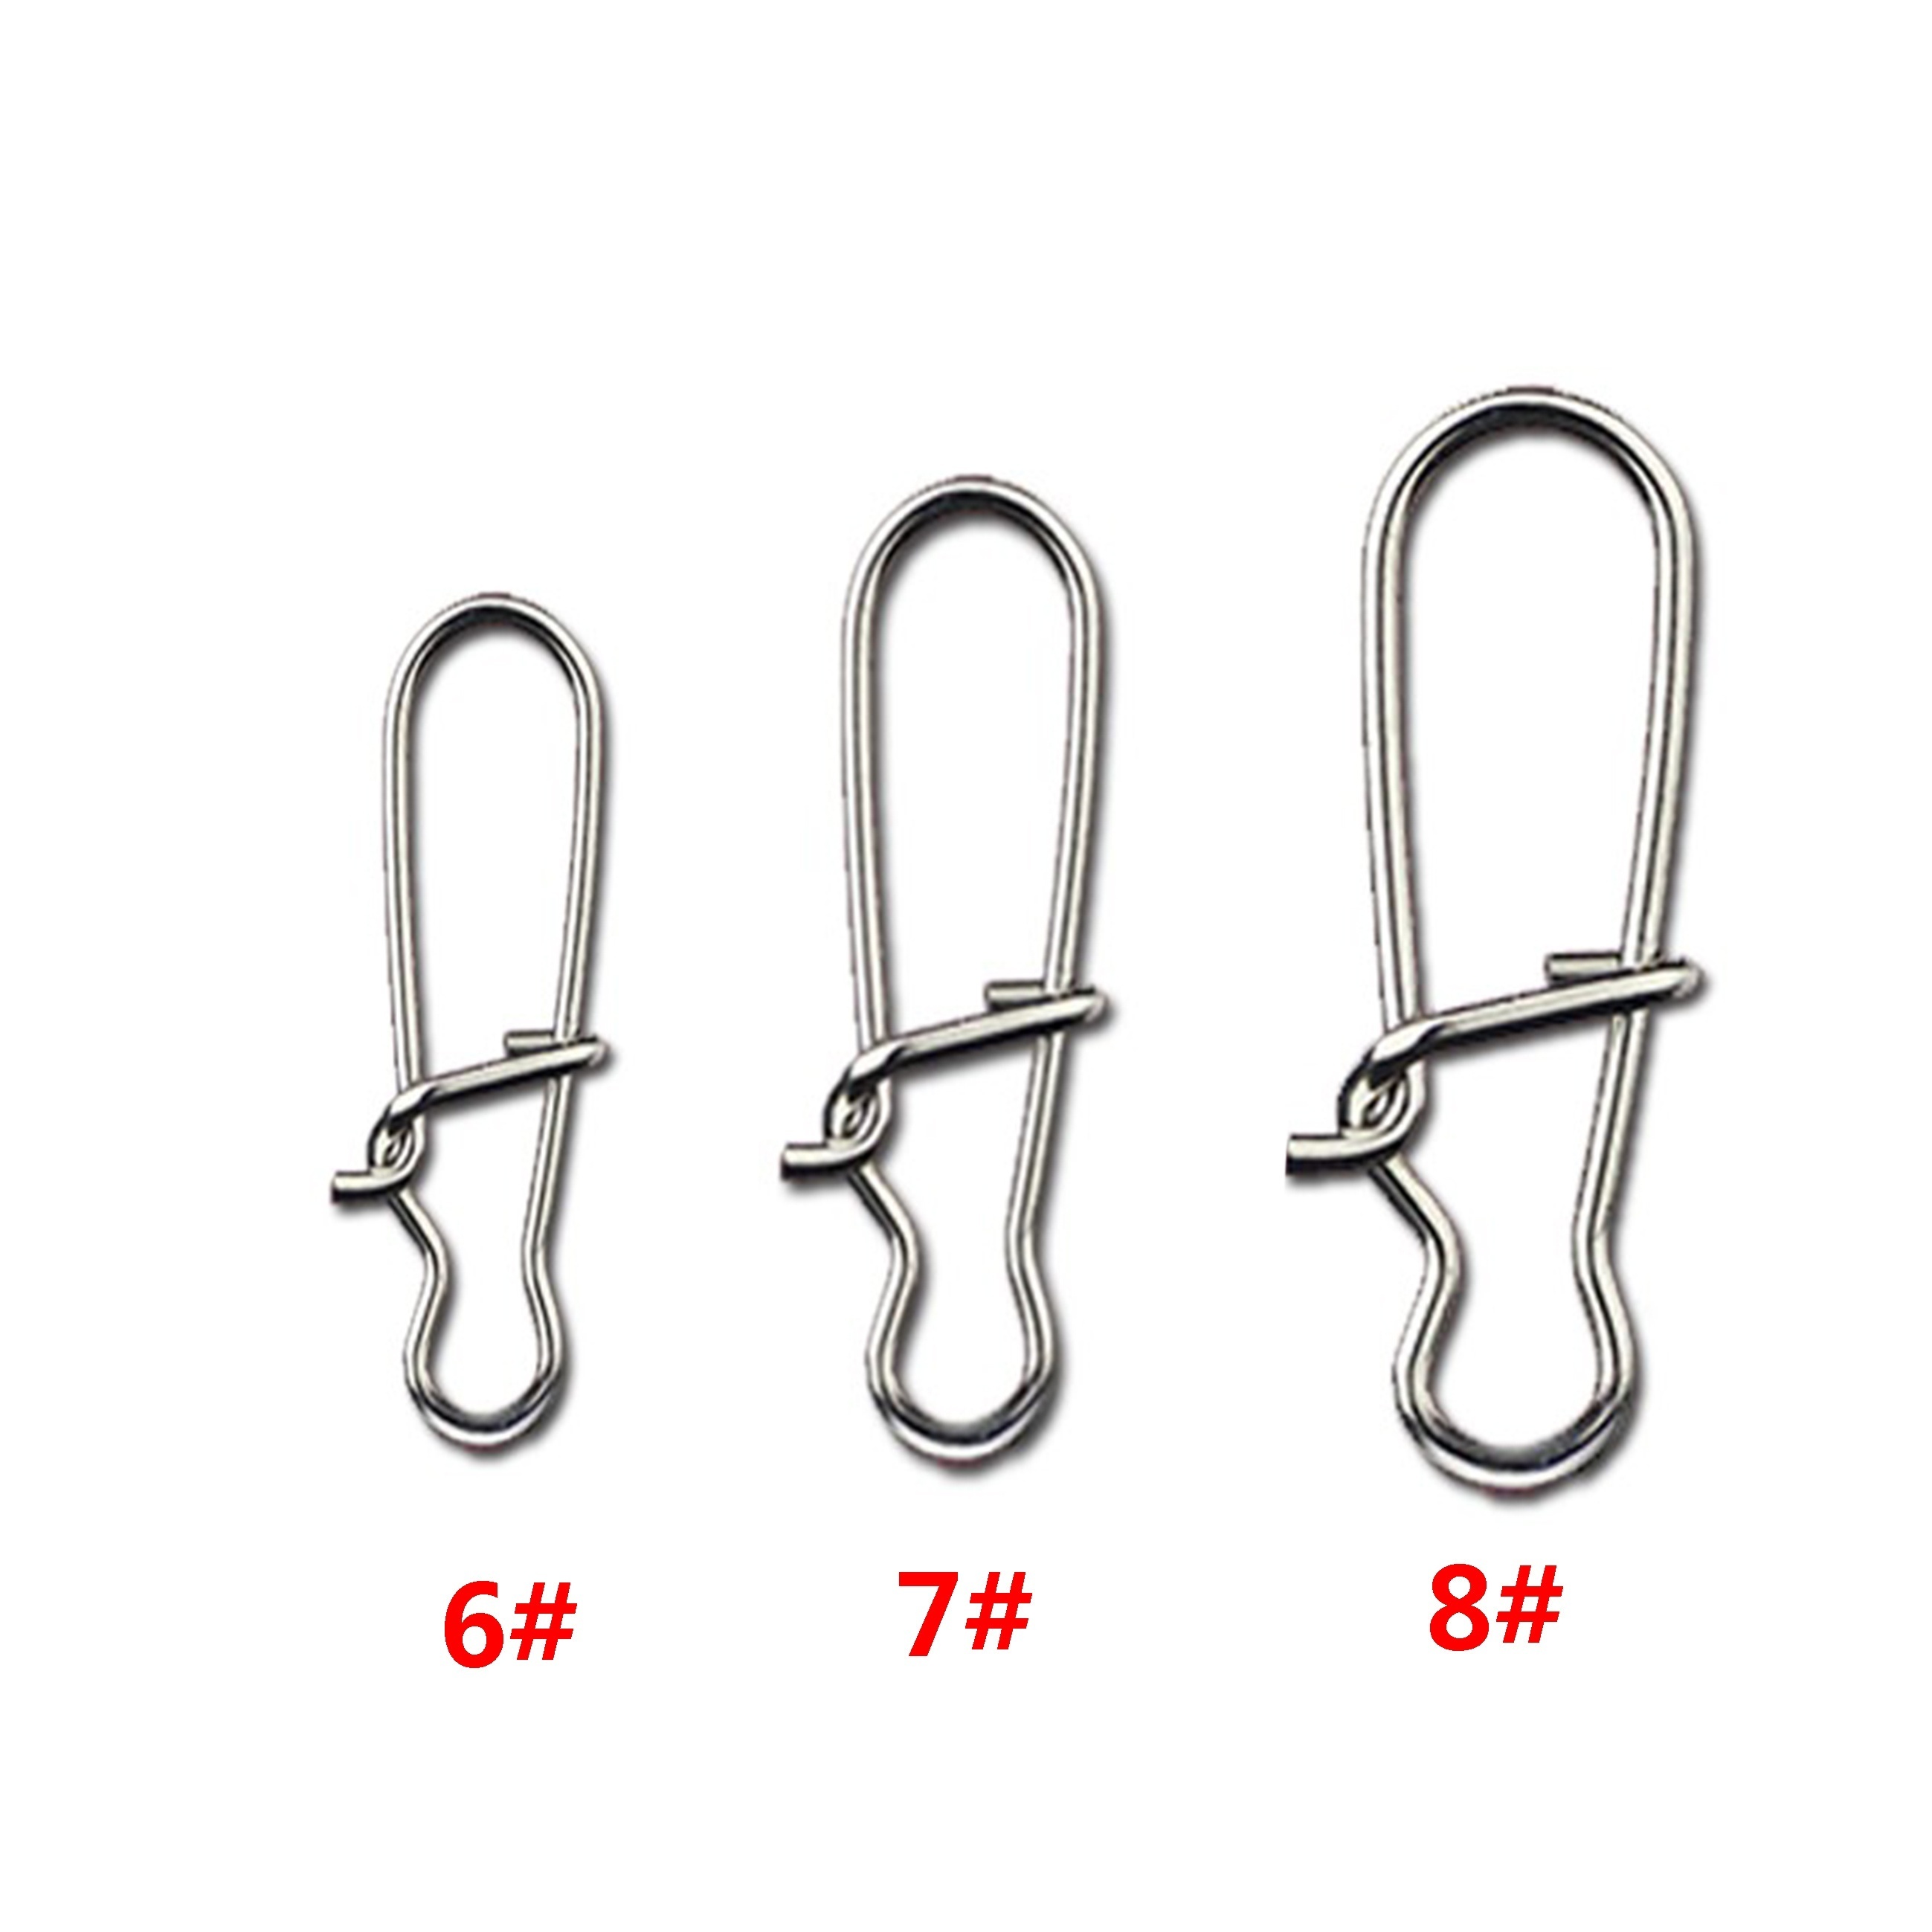 50pcs High Strength Fishing Snap Clip, Double Locking Buckle, Swivel  Stainless Steel Quick Change Fishing Buckle, Outdoor Fishing Supplies,  Fishing To